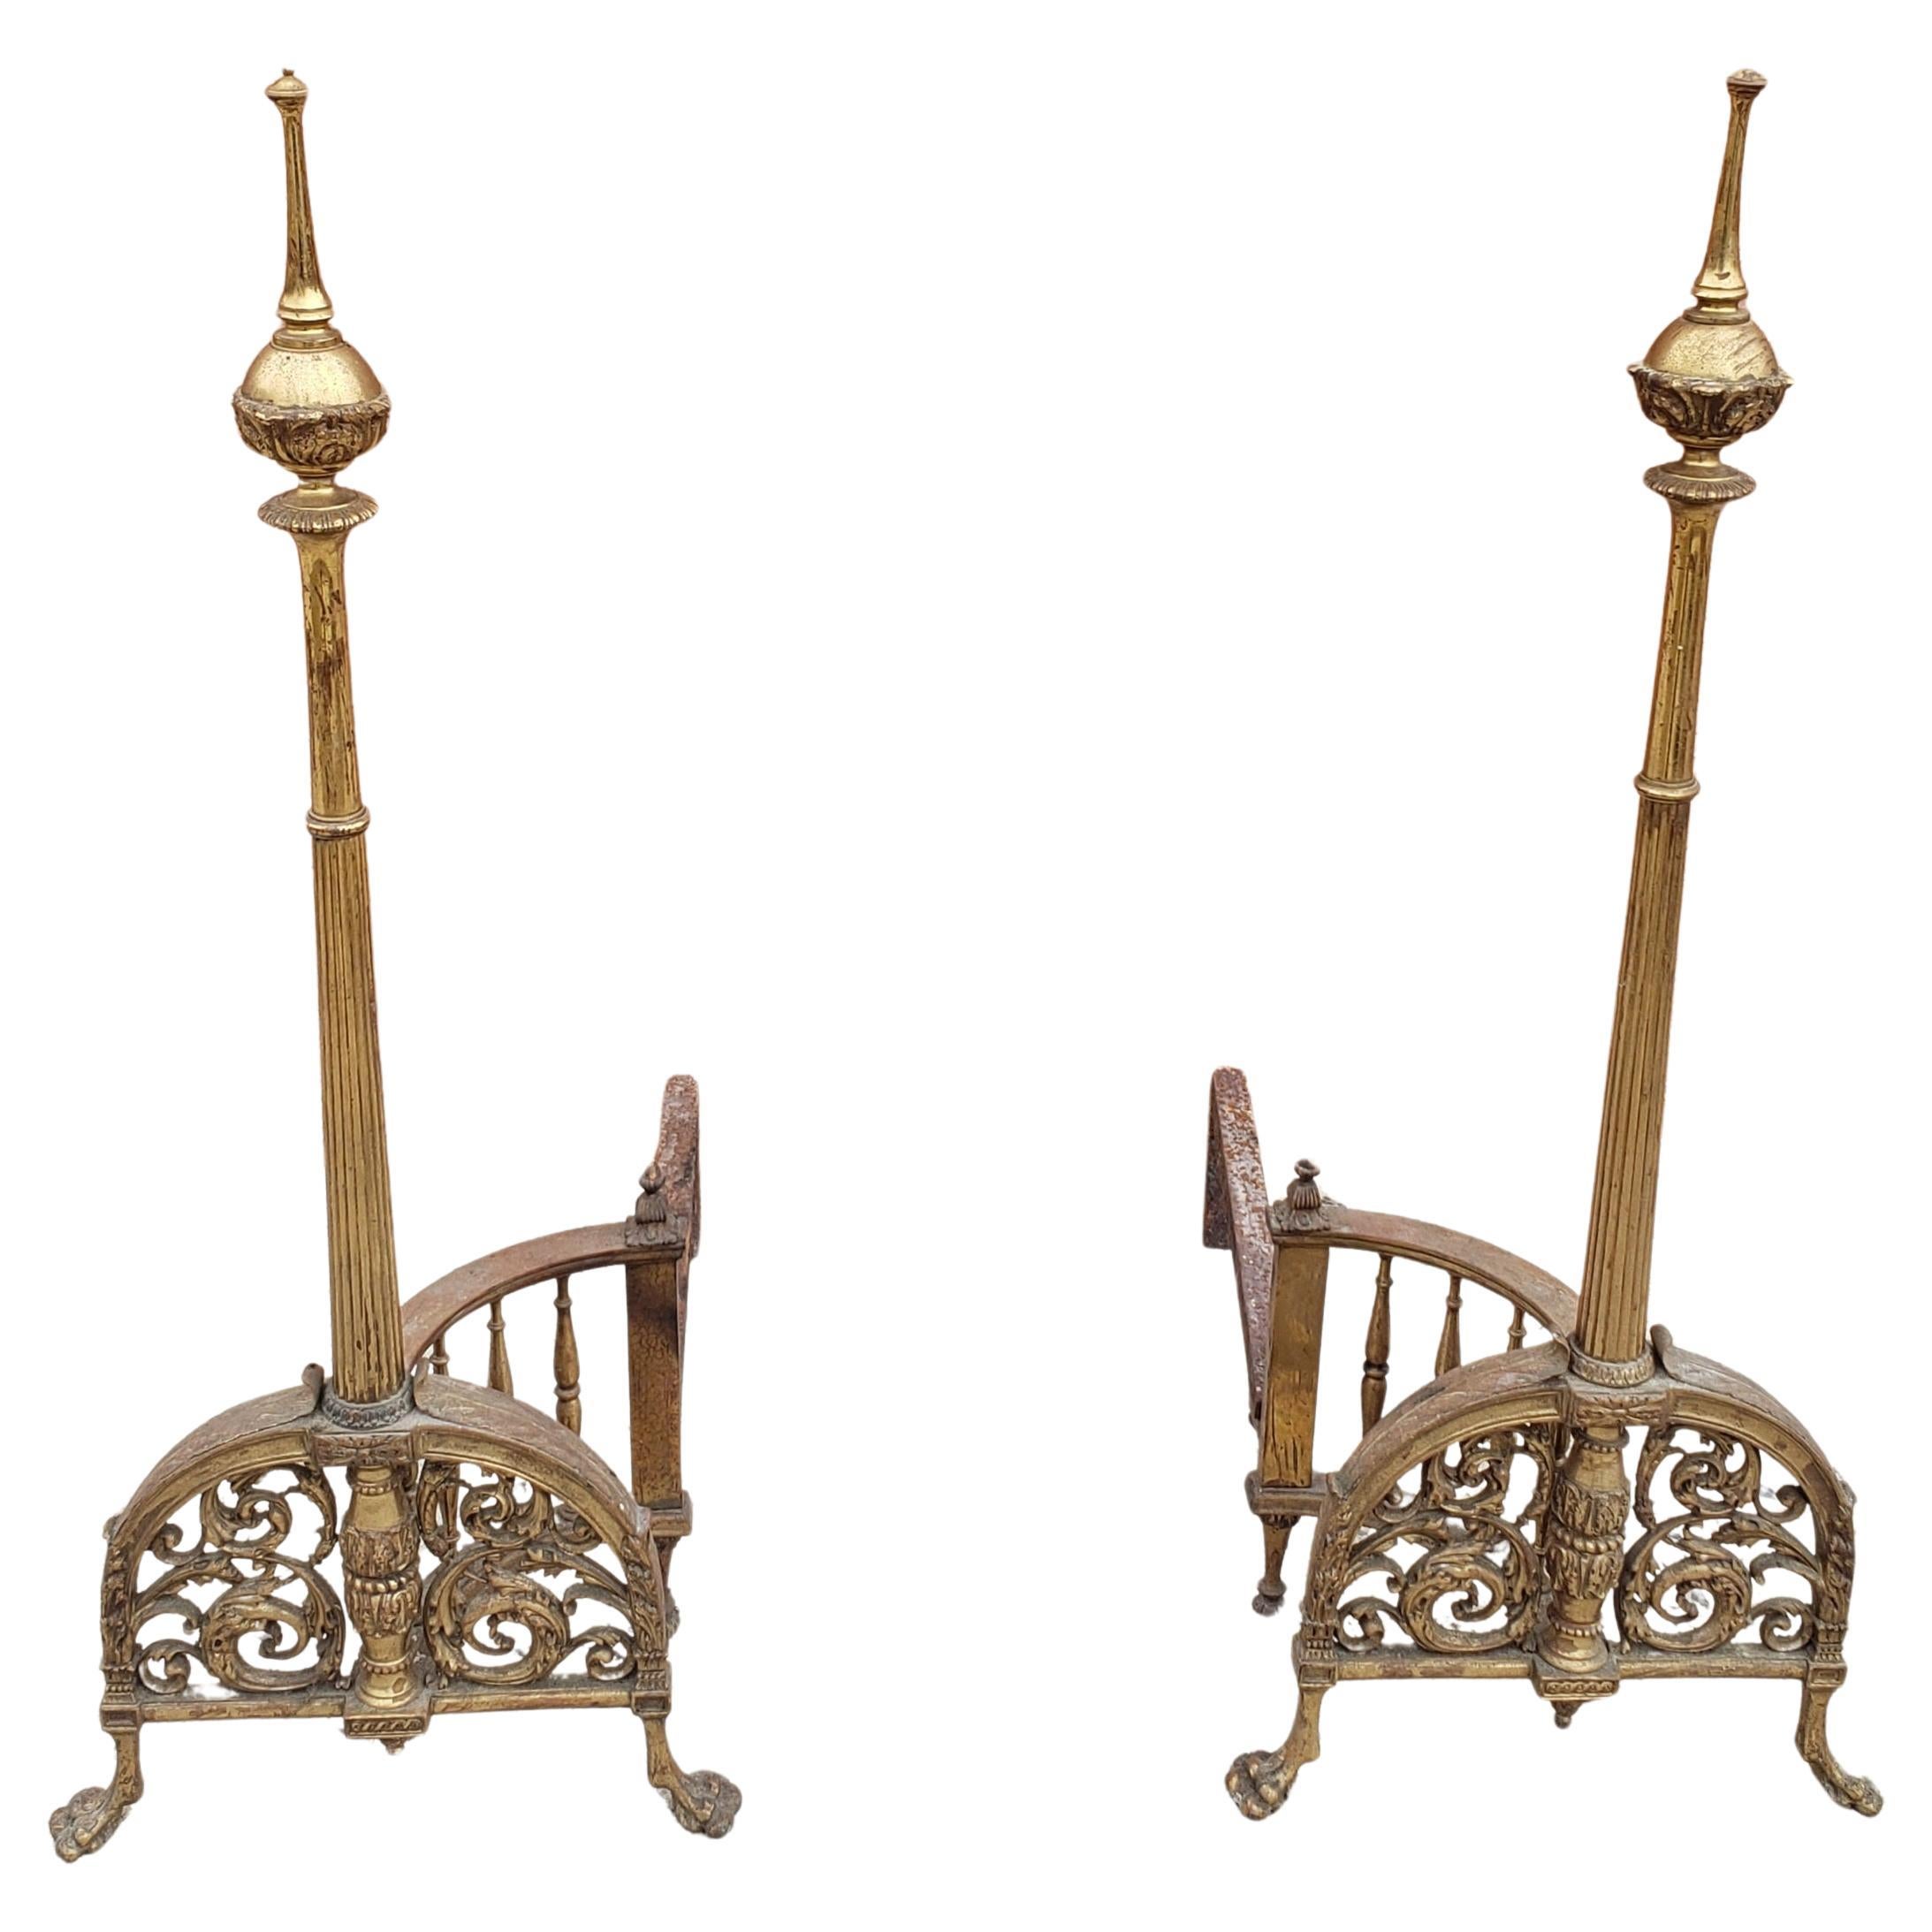 Early 20th Century Tall French Empire Brass and Iron Andirons, Pair For Sale